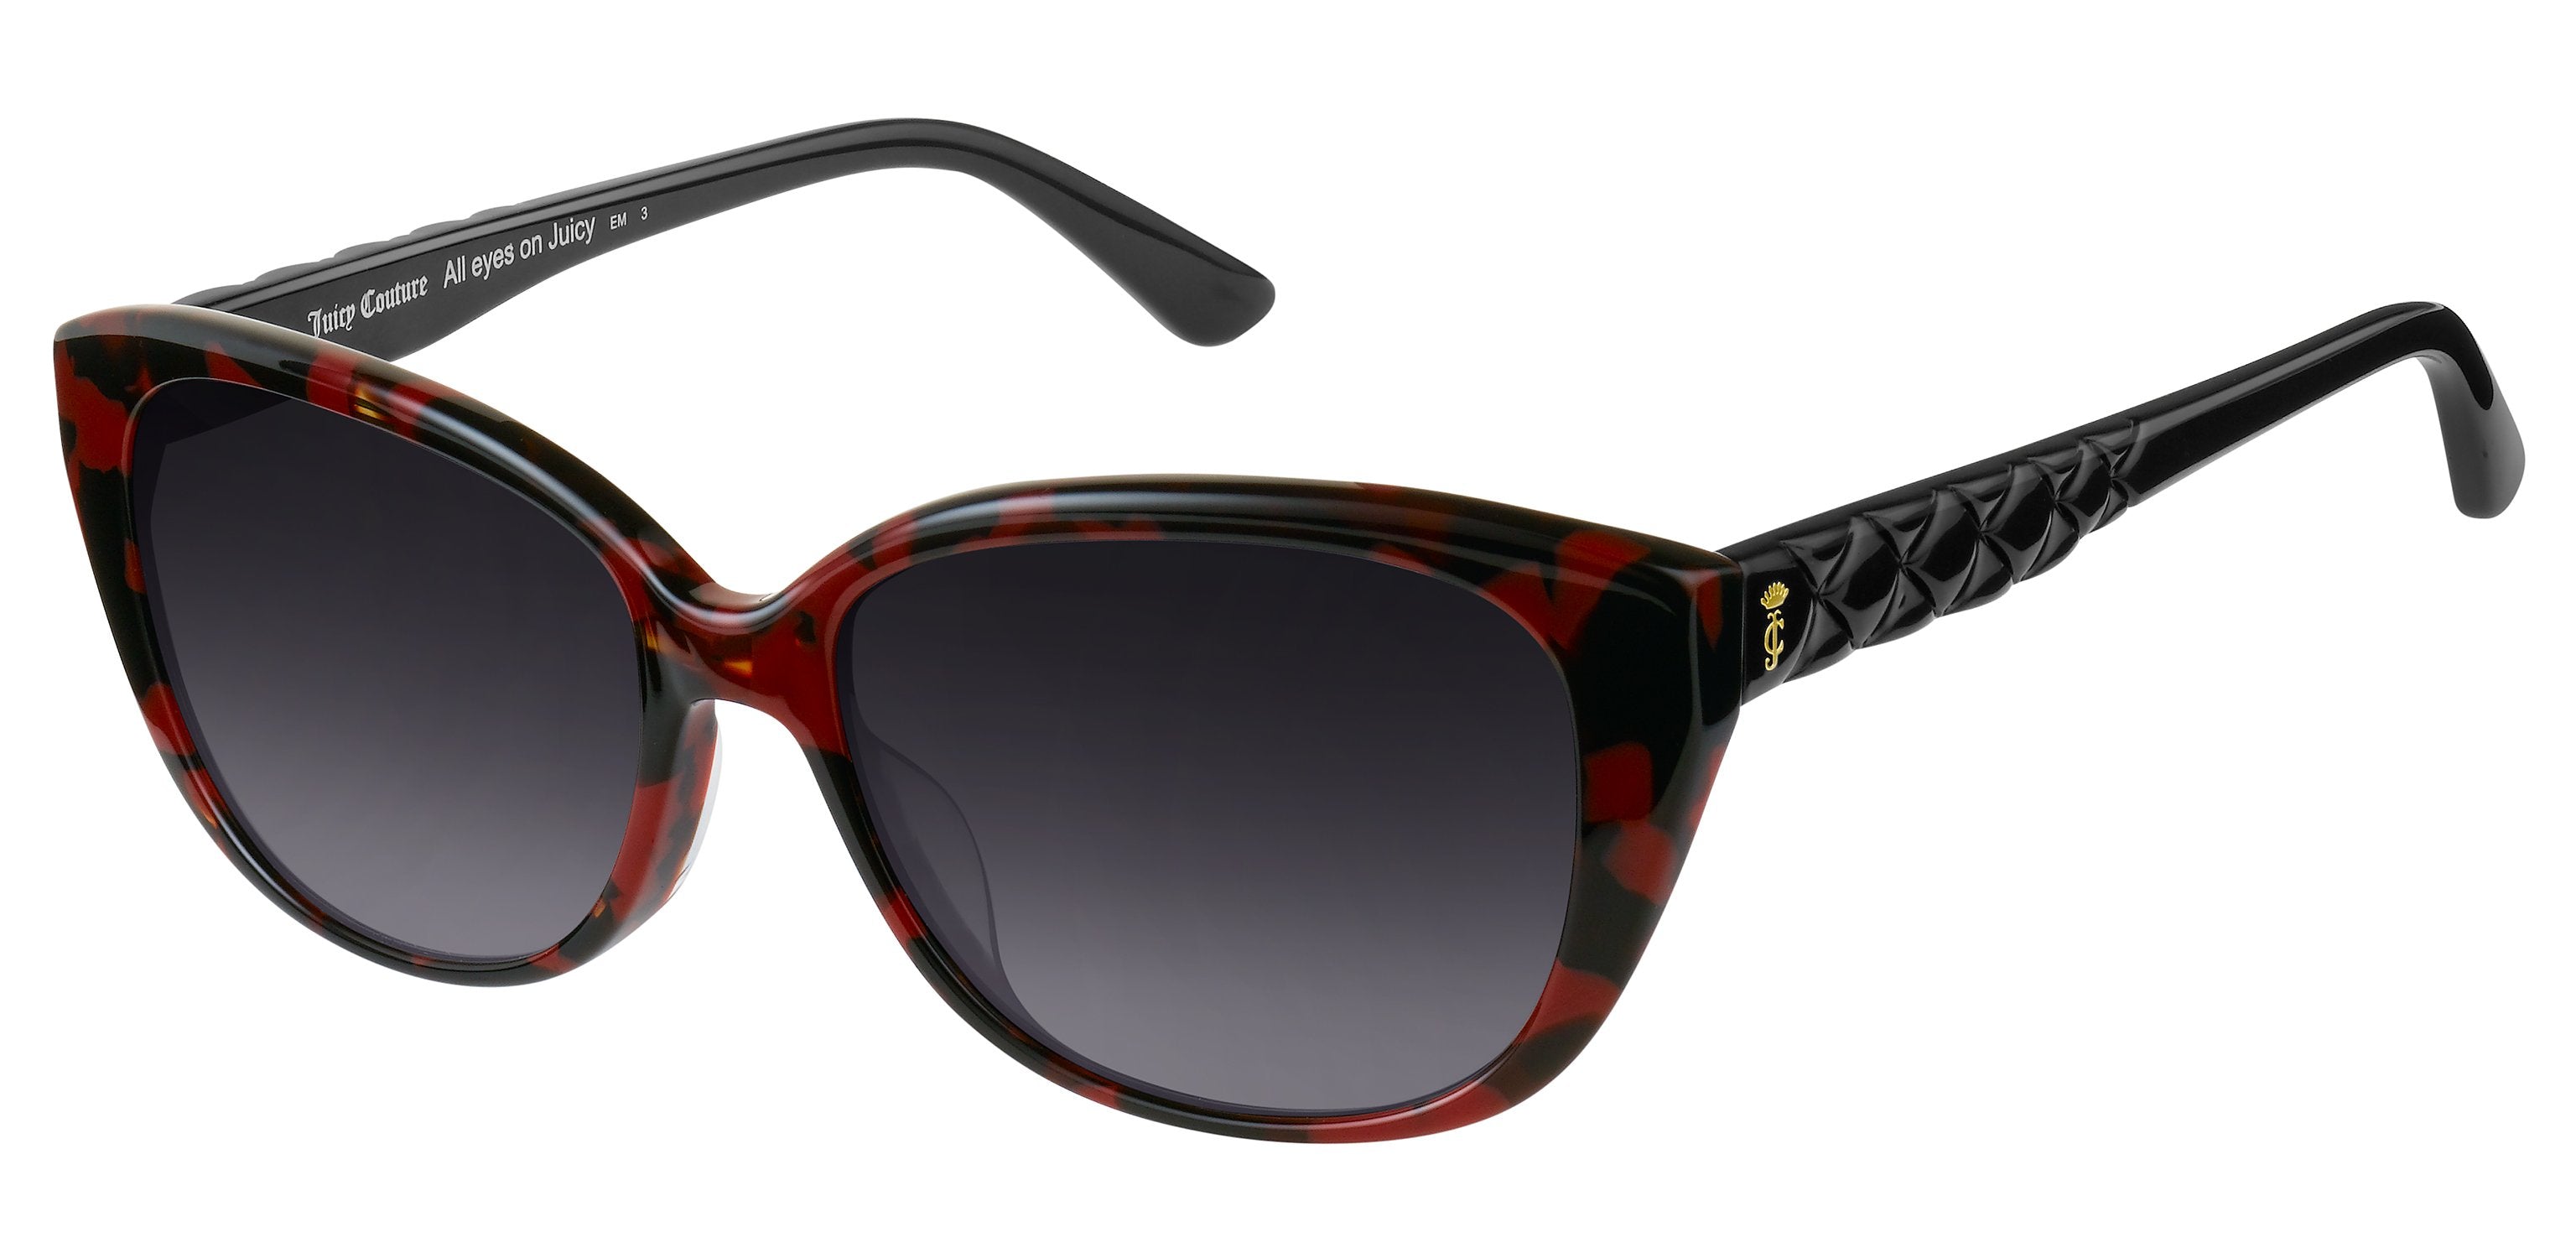 Juicy Couture Sunglass Round Woman